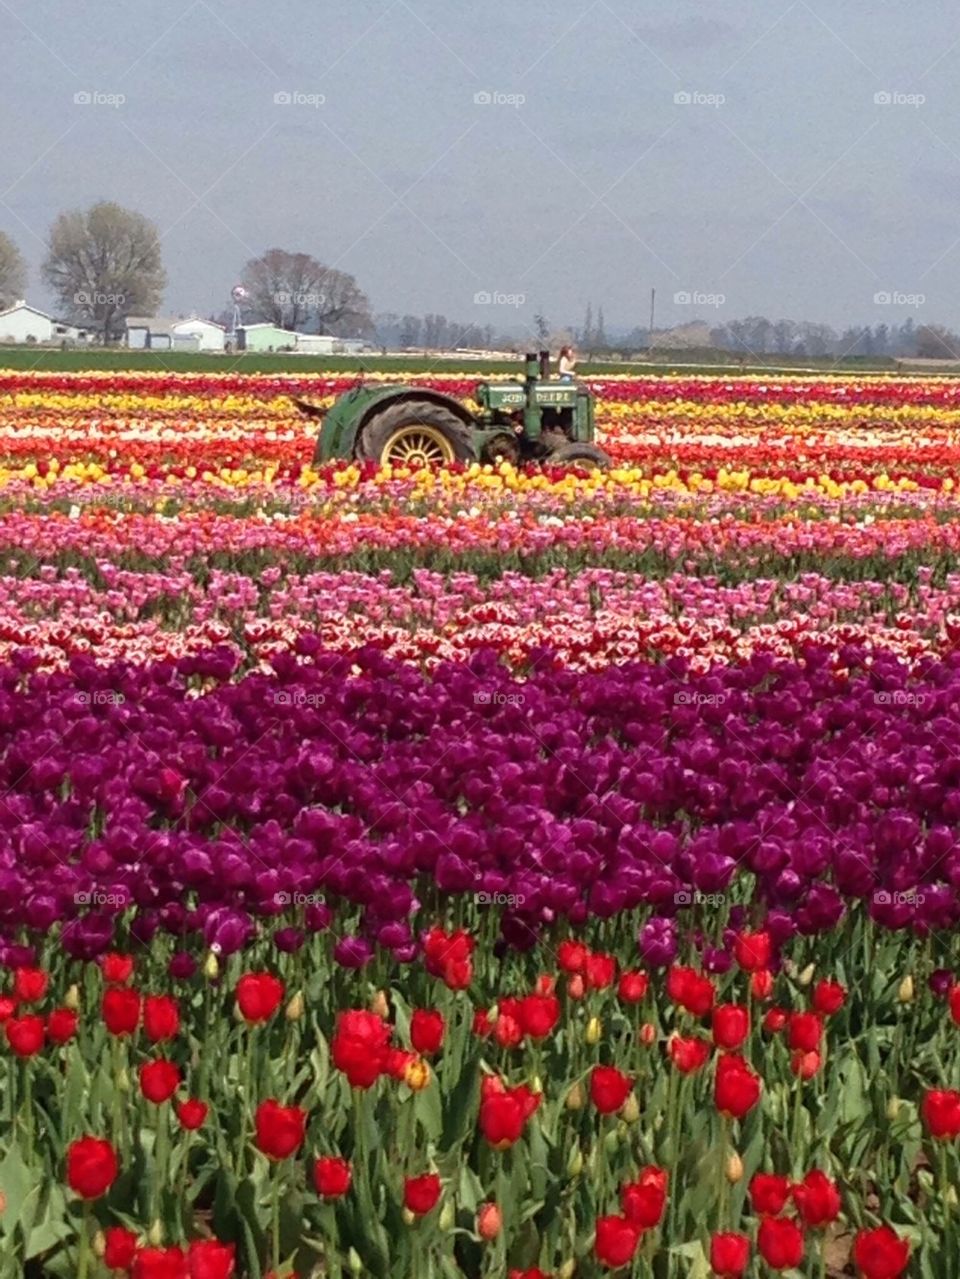 Tractor and tulips